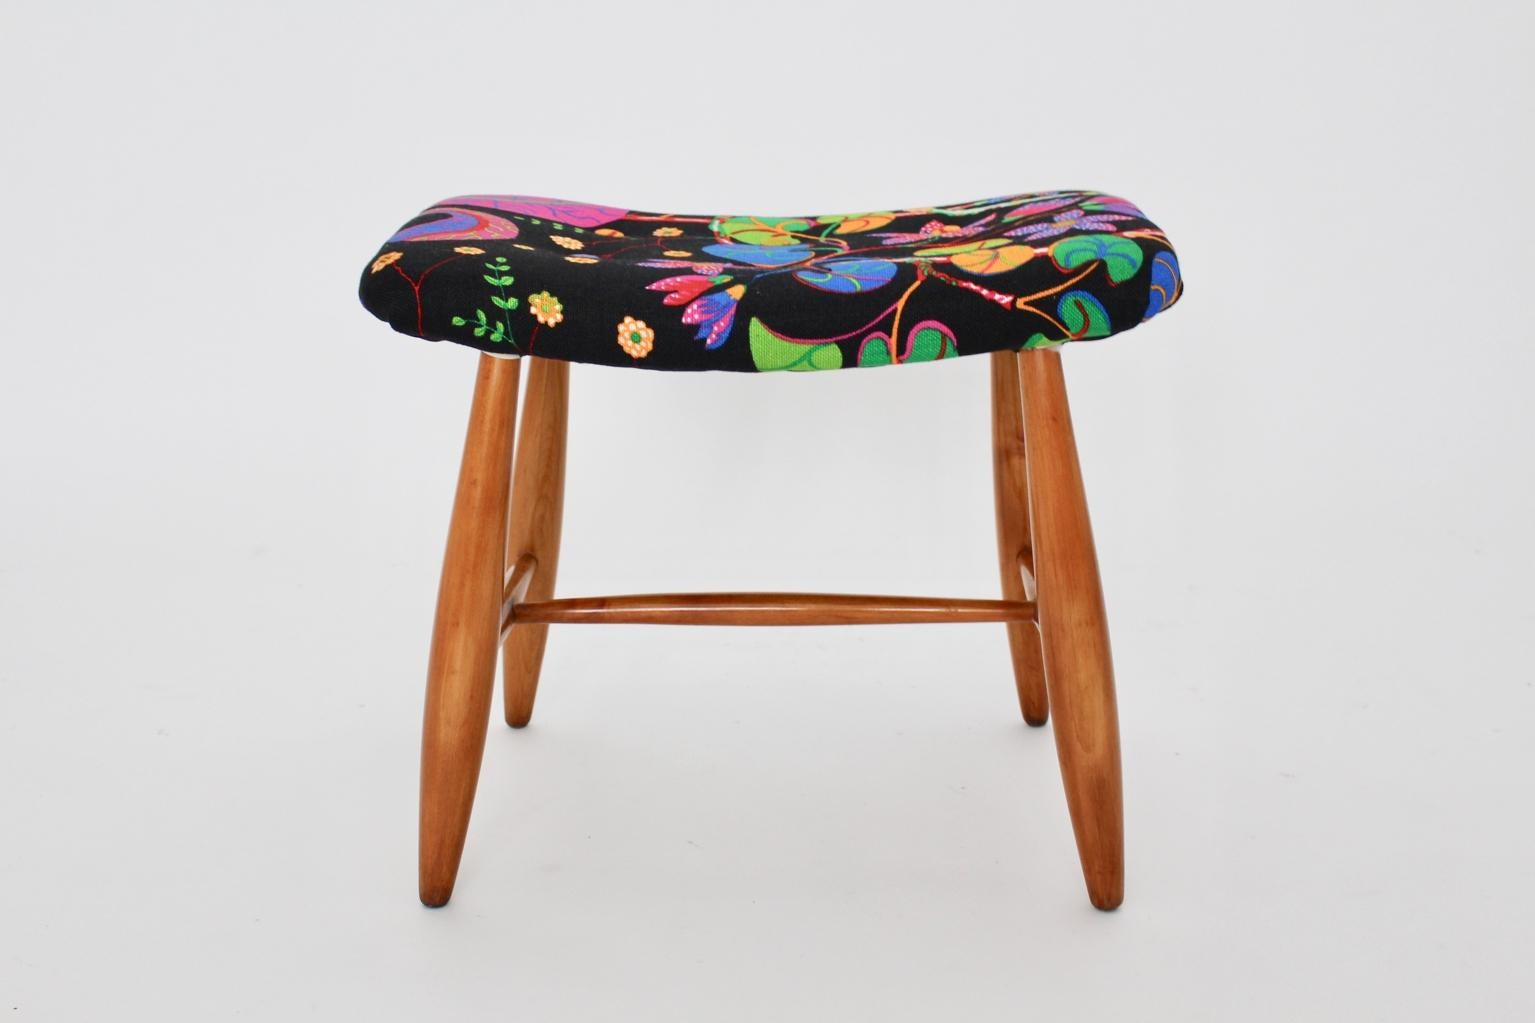 Art Deco vintage stool from cherrywood and fabric by Josef Frank for Haus and Garten, circa 1925 Vienna.
While the frame from solid cherrywood in an amazing warm color tone the upholstery is renewed with lush and colorful textile fabric by Josef